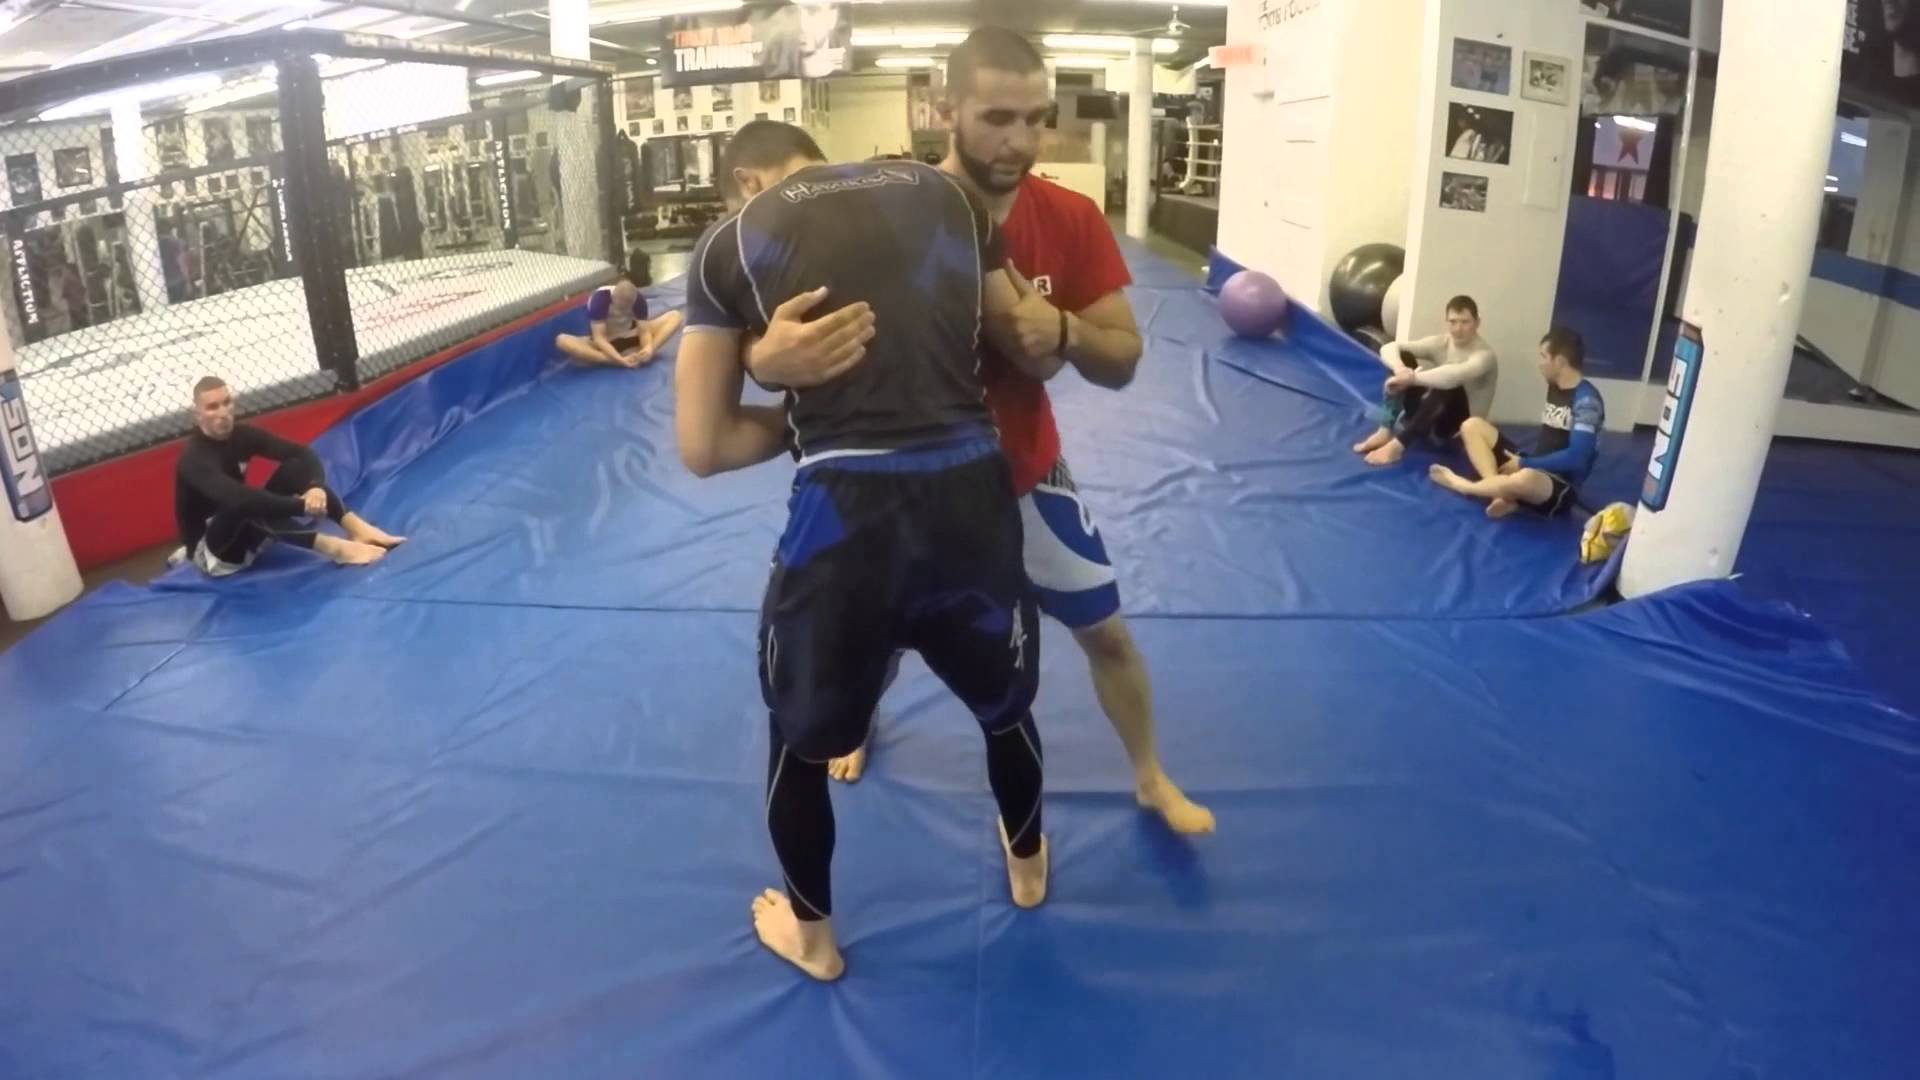 Clinch Takedown – Turning the Corner from Over Under Position – Firas Zahabi